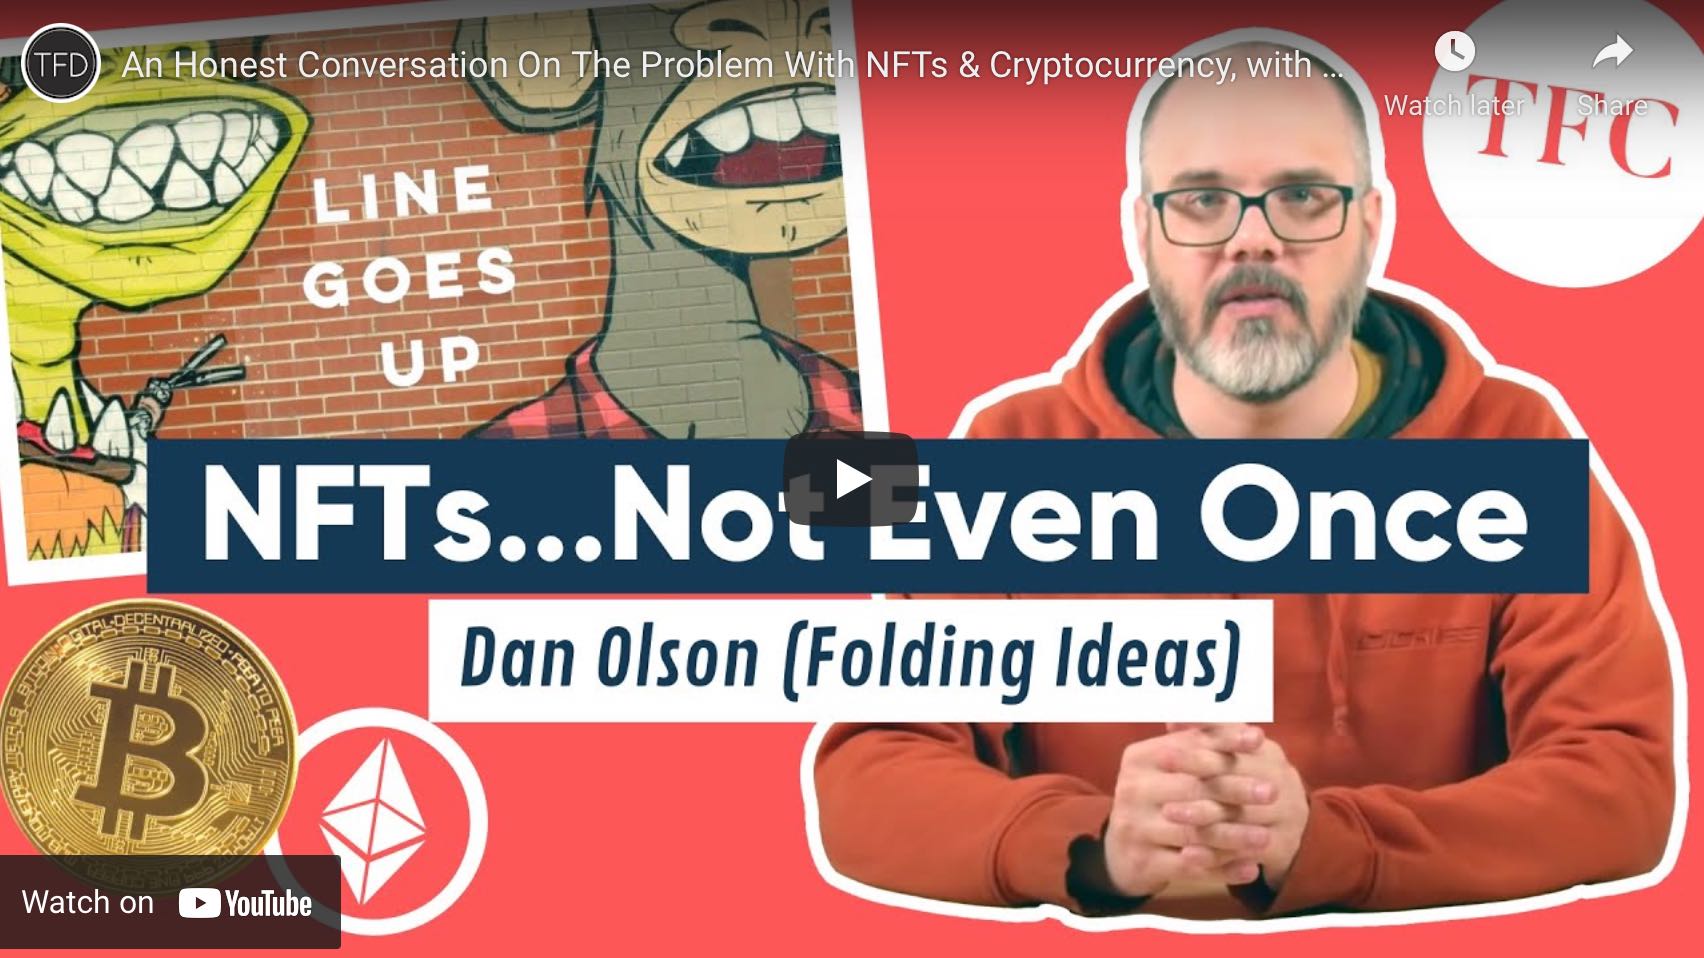 Youtube thumbail of 'NFTs … not even once', showing Dan Olson and the title in large letters with the thumbail of 'Line Goes Up' in the background